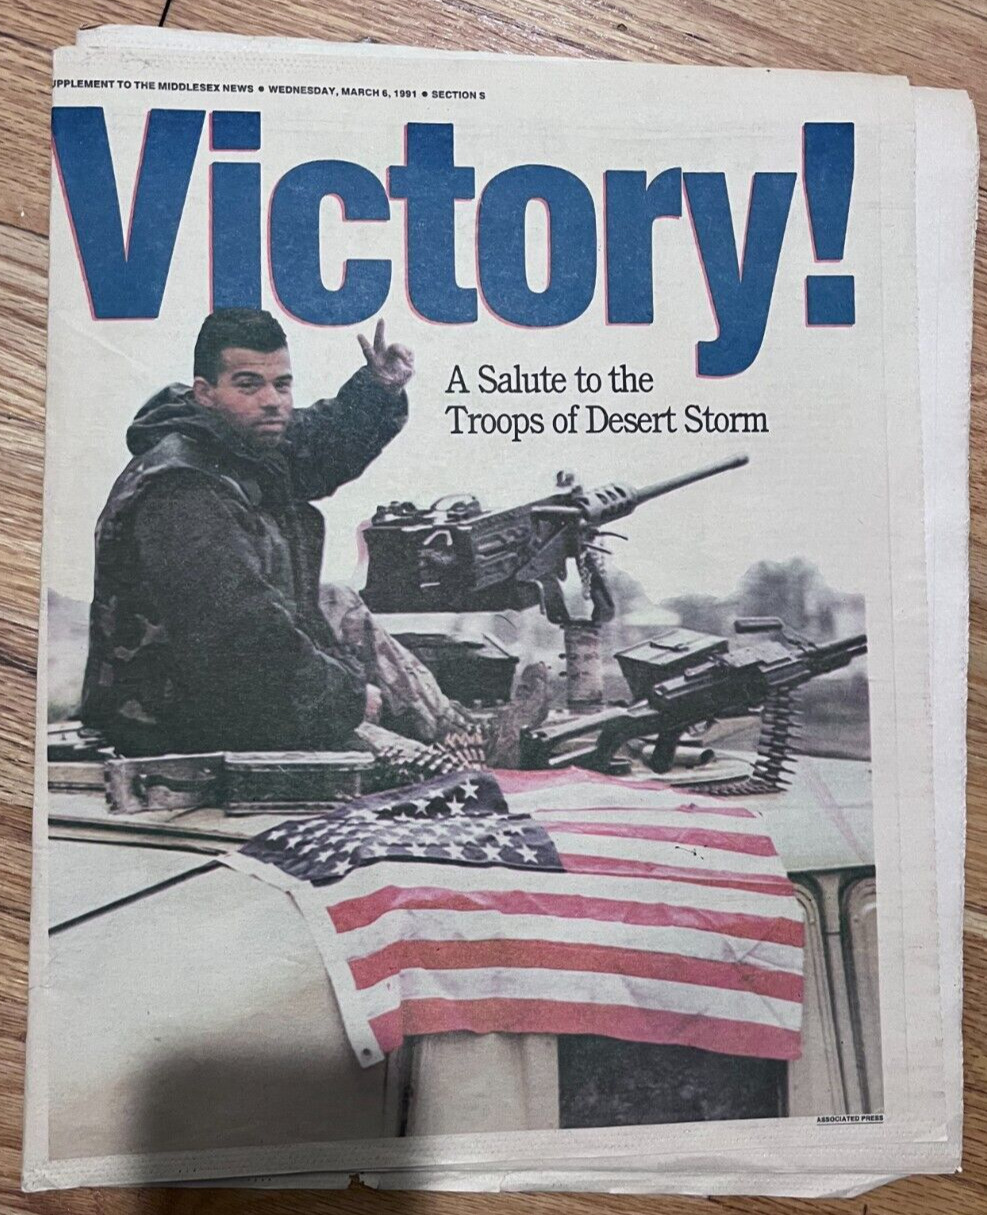 March 6 1991 Middlesex News VICTORY Desert Storm  Iraq war middle east